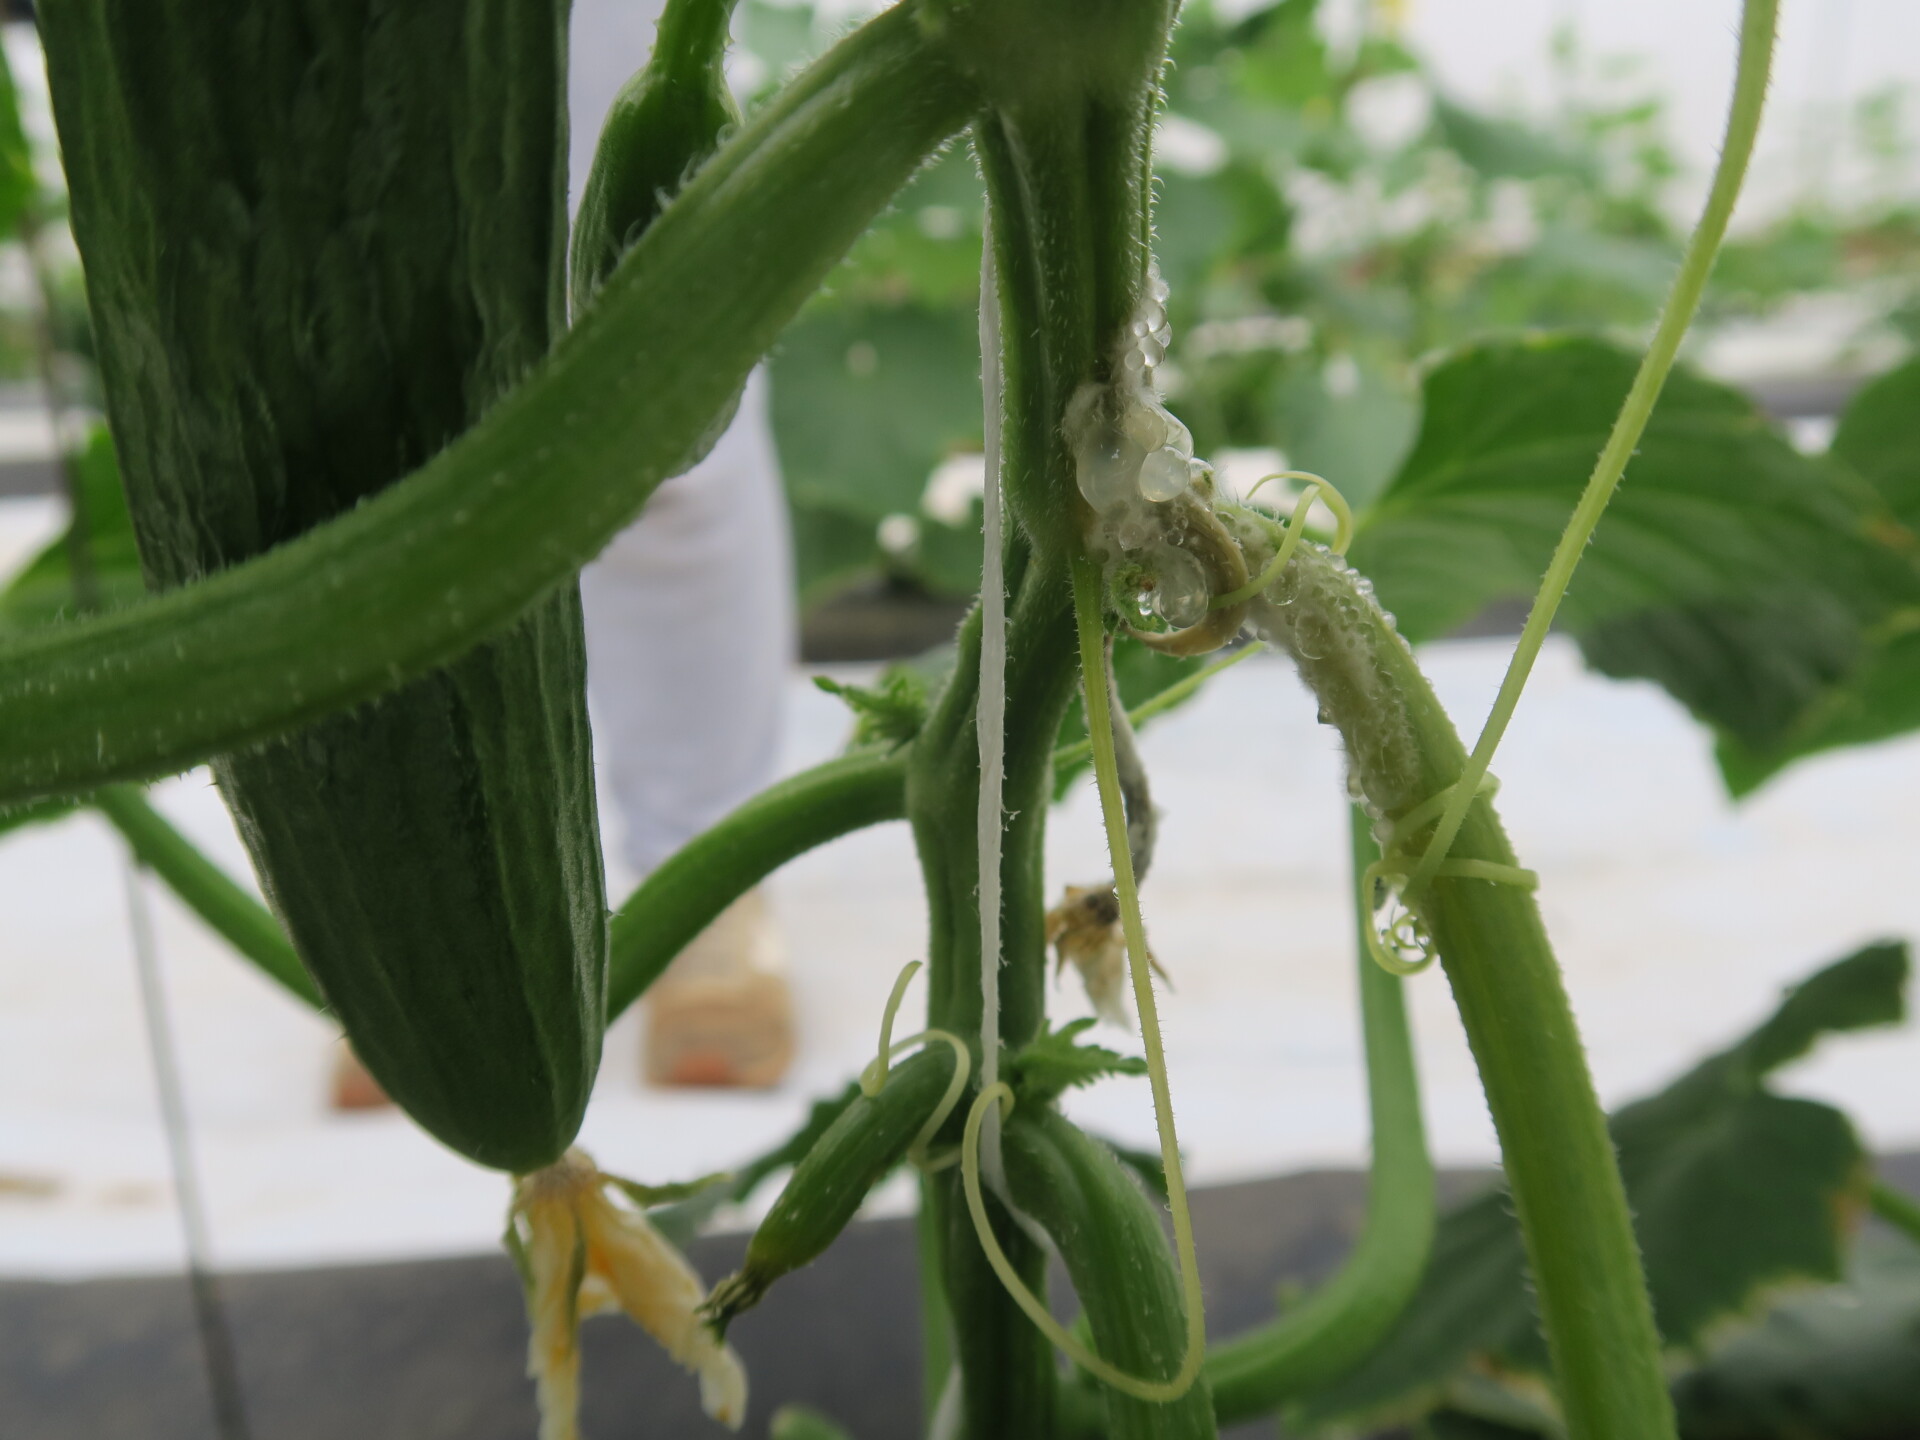  Early symptoms of white mold of cucumber.